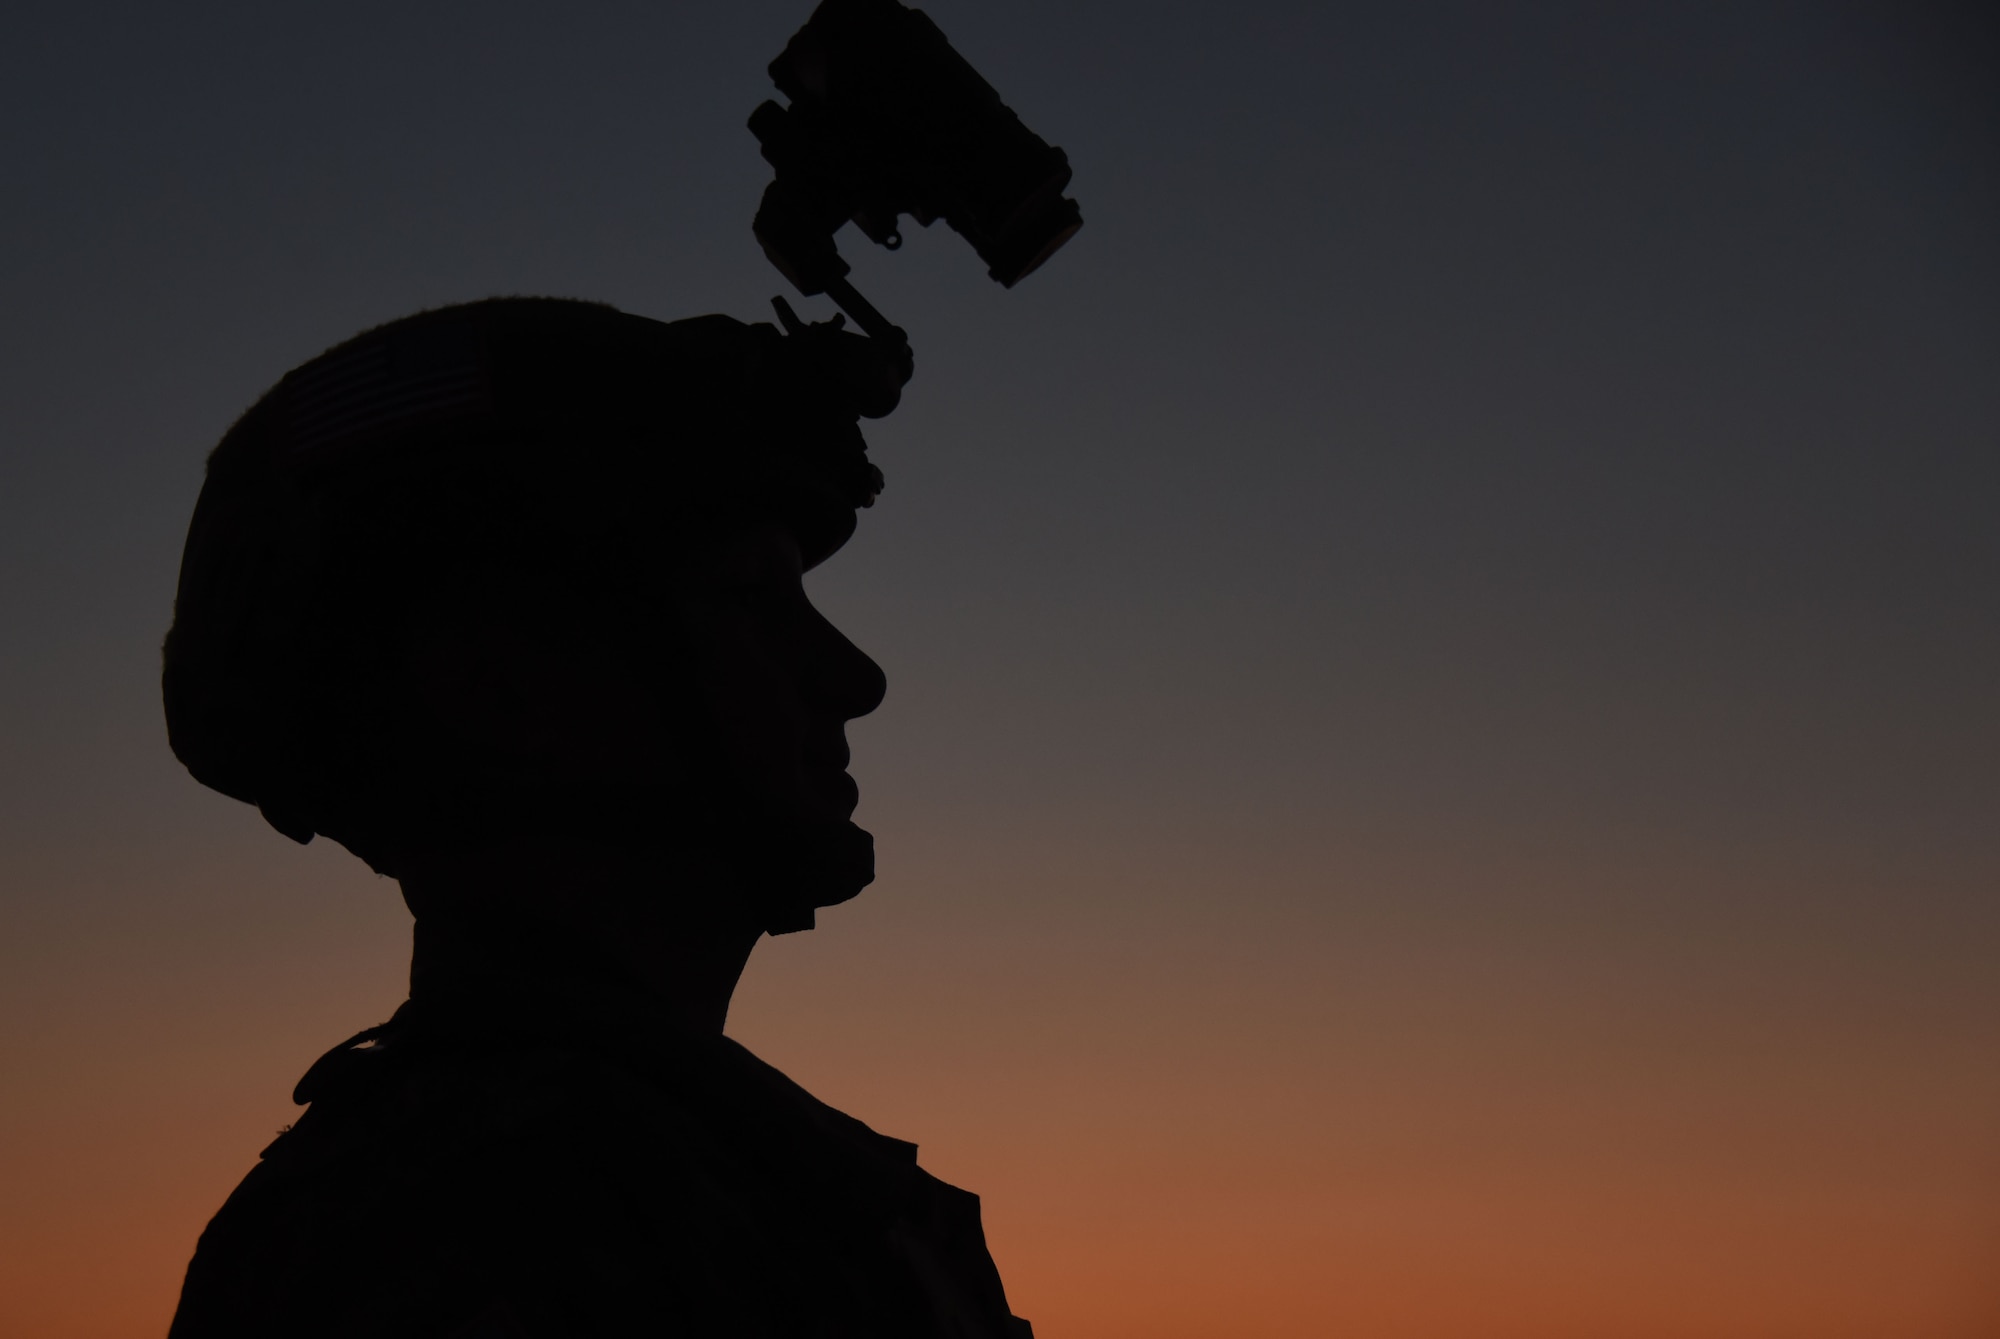 Capt. Eric Danko, with the 321st Contingency Response Squadron, prepares for a night air drop and C-130 Hercules landing during training at Camp Branch Landing Zone in Logan County, W.Va., Aug. 22, 2018. The 621st CRG spent four days training with and working alongside the 130th Air National Guard at Camp Branch practicing semi-prepared runway operations. (U.S. Air Force photo by Tech. Sgt. Jamie Powell)